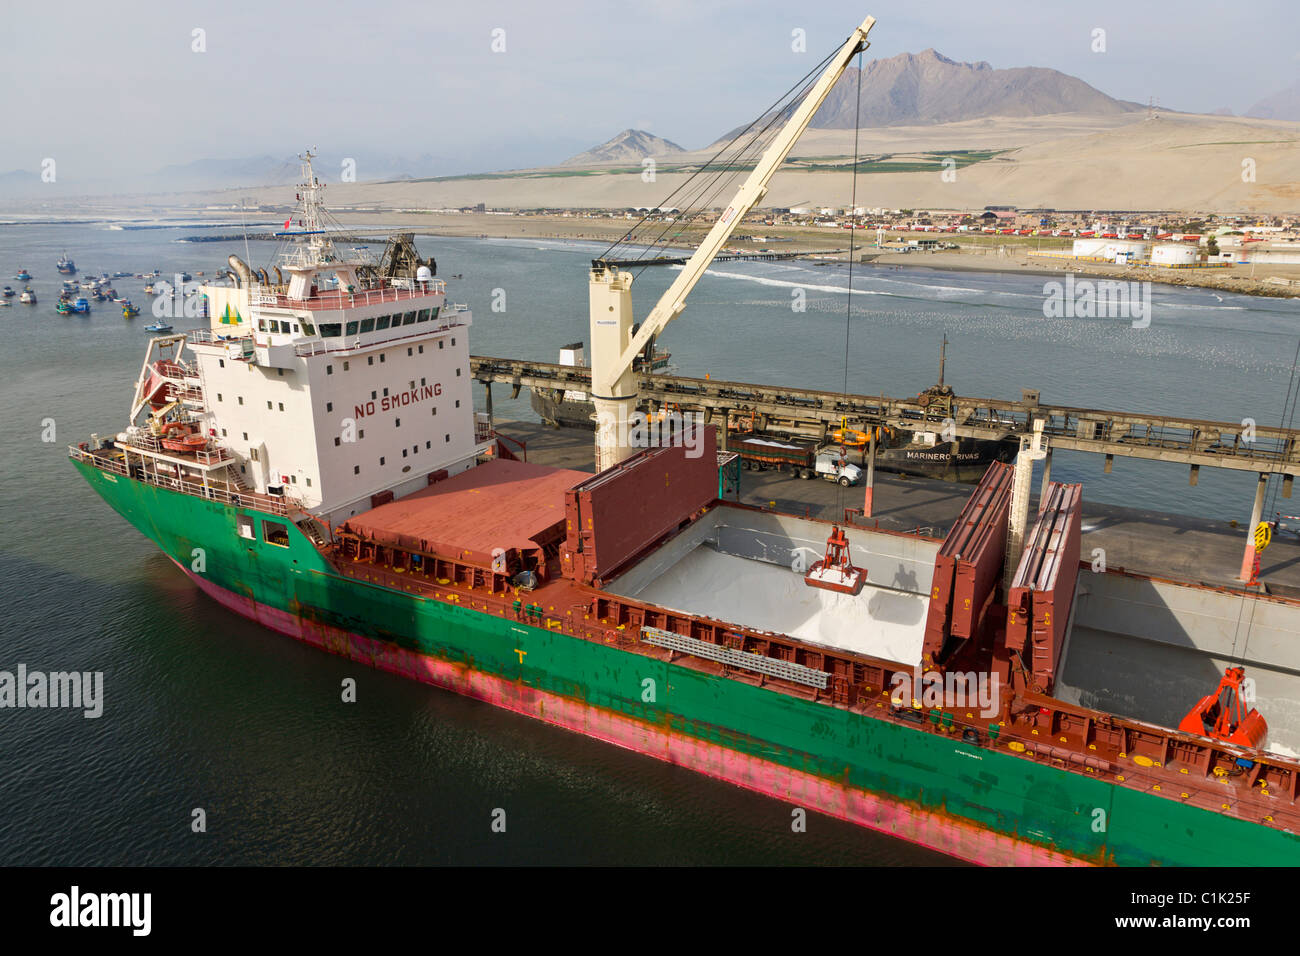 Cargo ship being unloaded at the port of Salaverry, Trujillo, Peru Stock Photo